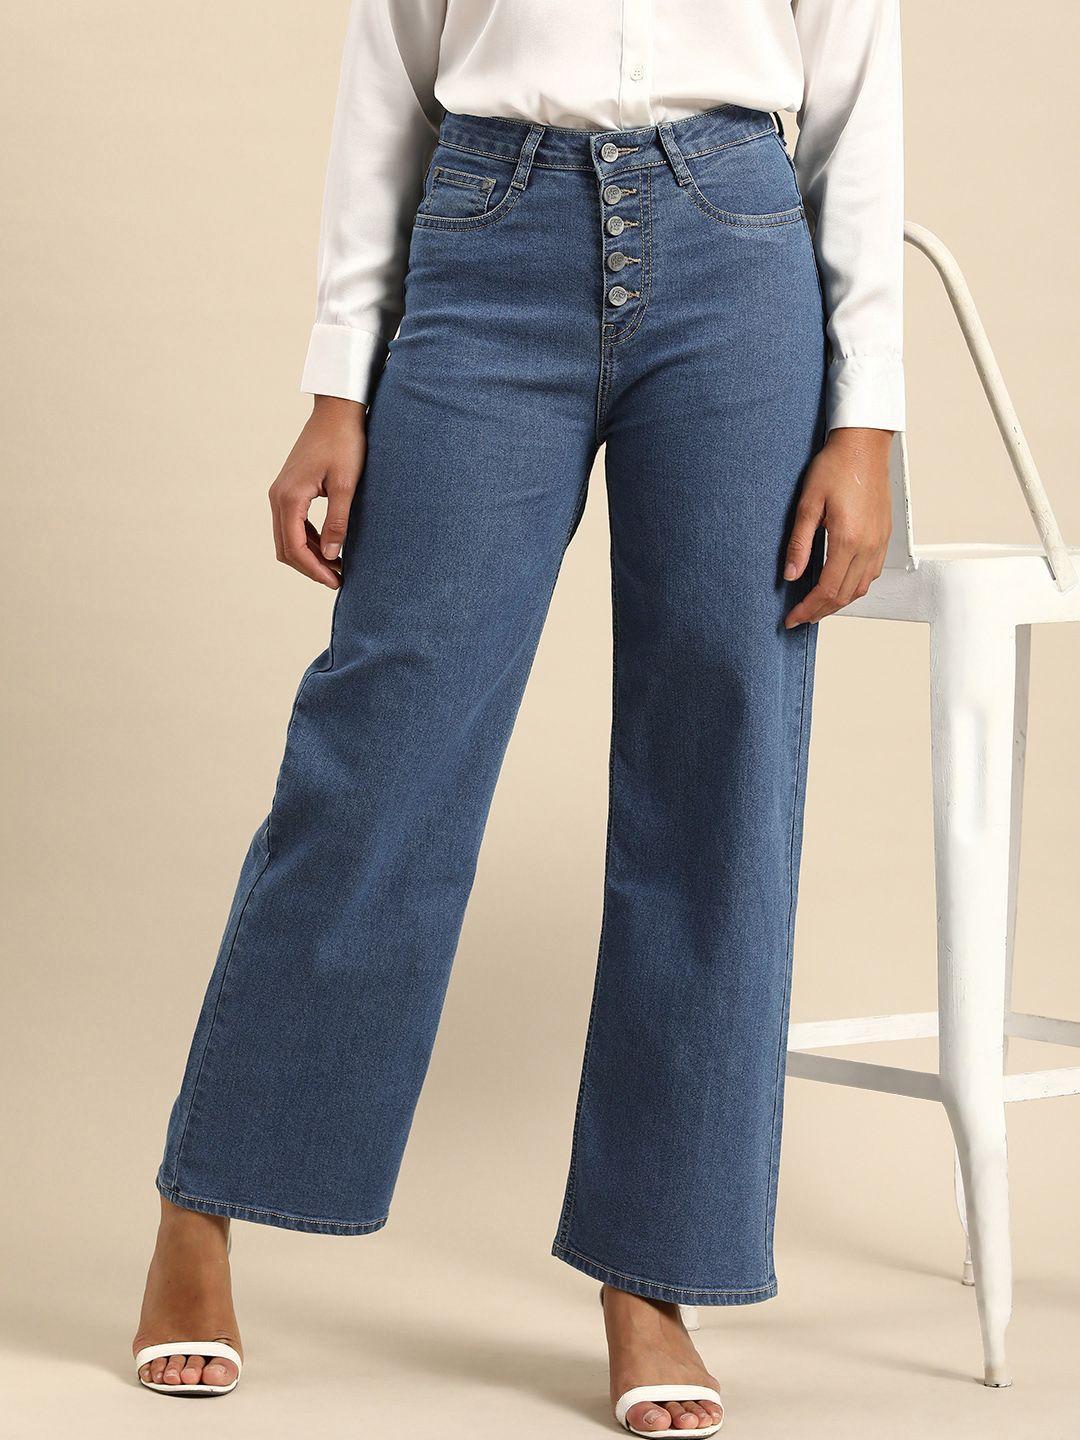 all-about-you-women-flared-high-rise-stretchable-jeans